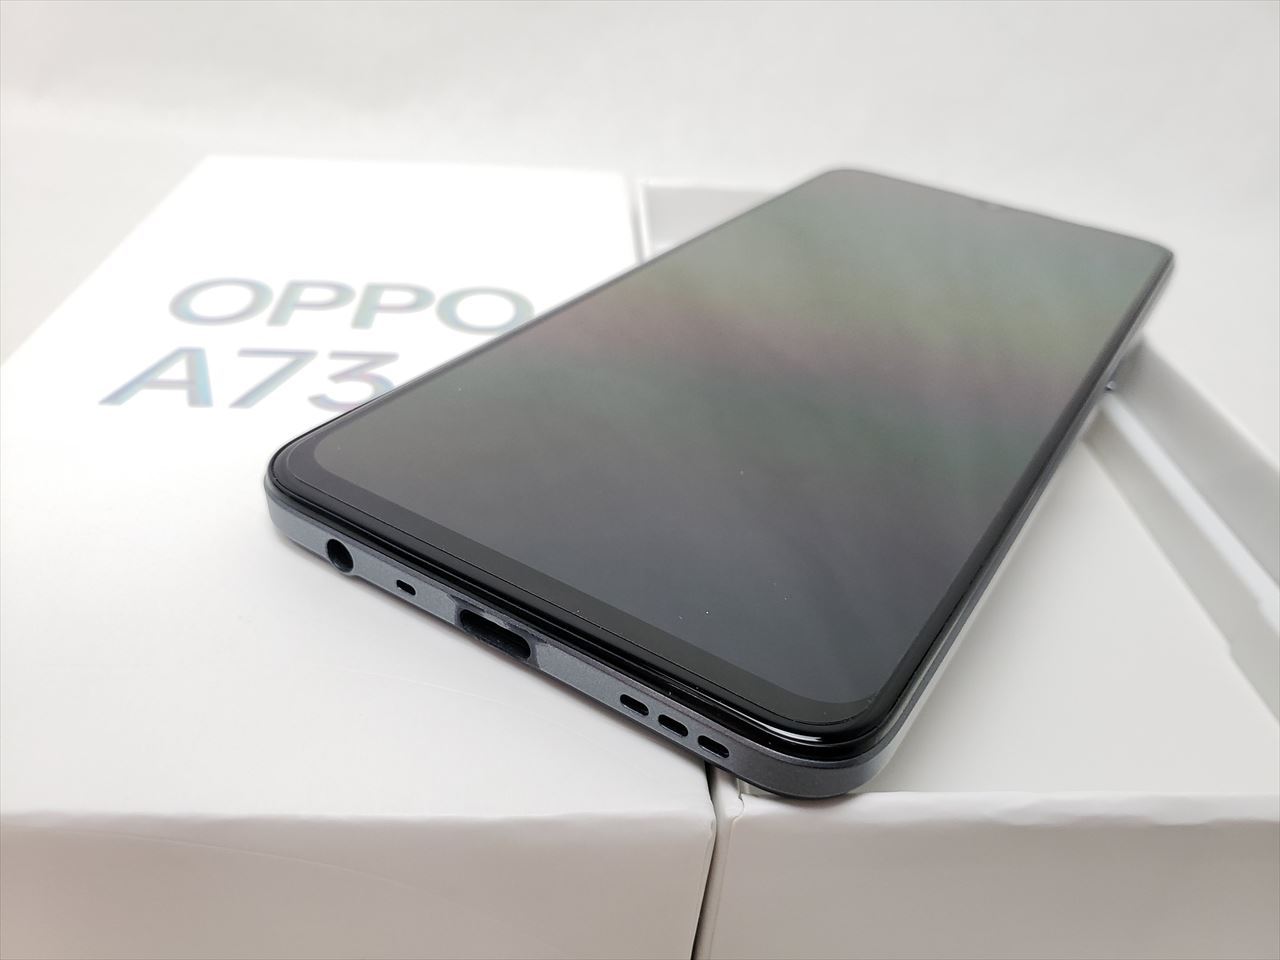 OPPO A73　ネービーブルー約1600万画素バッテリー容量